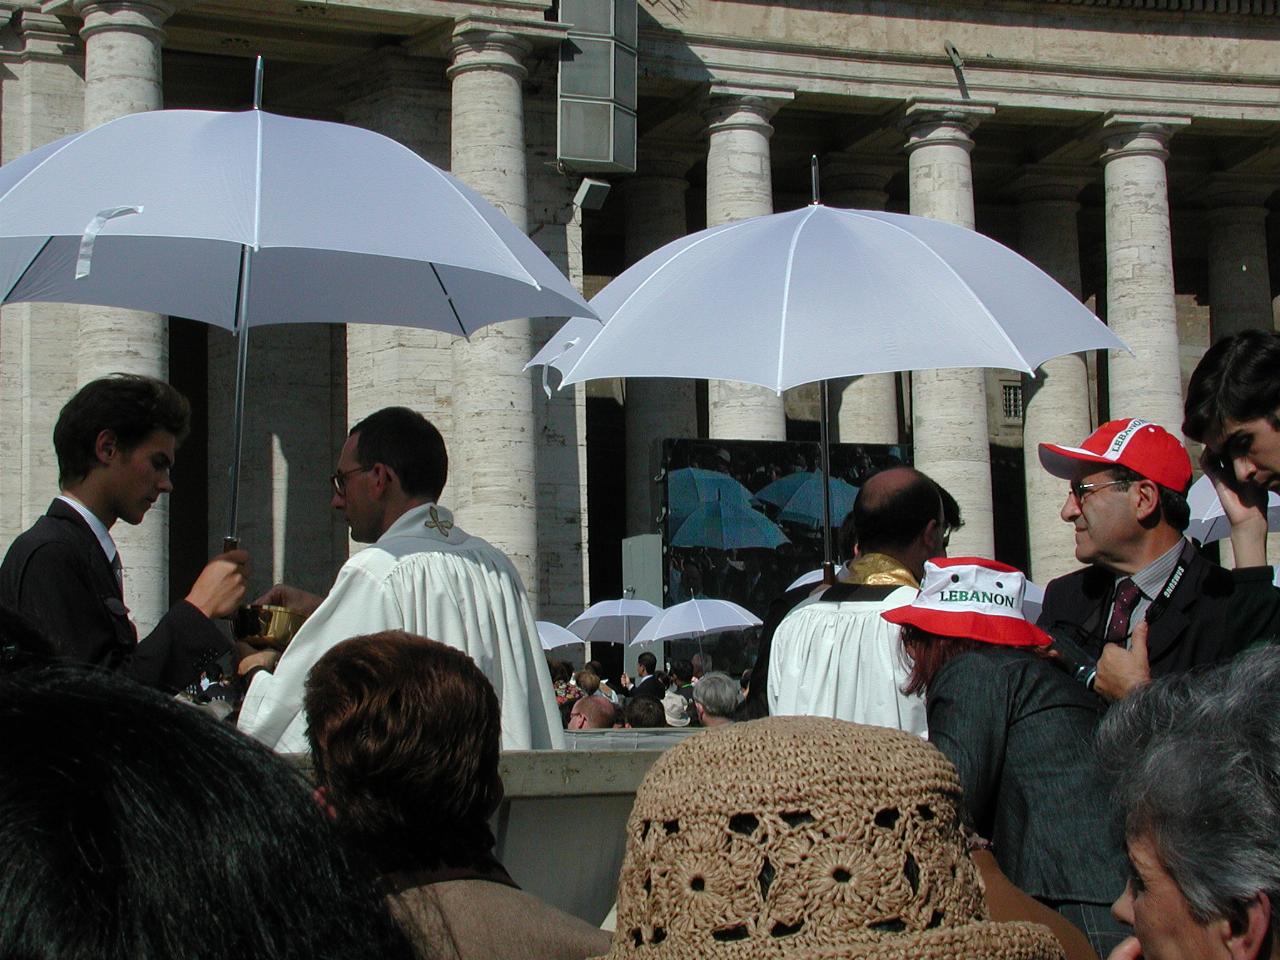 Priests and white umbrellas again for Communion